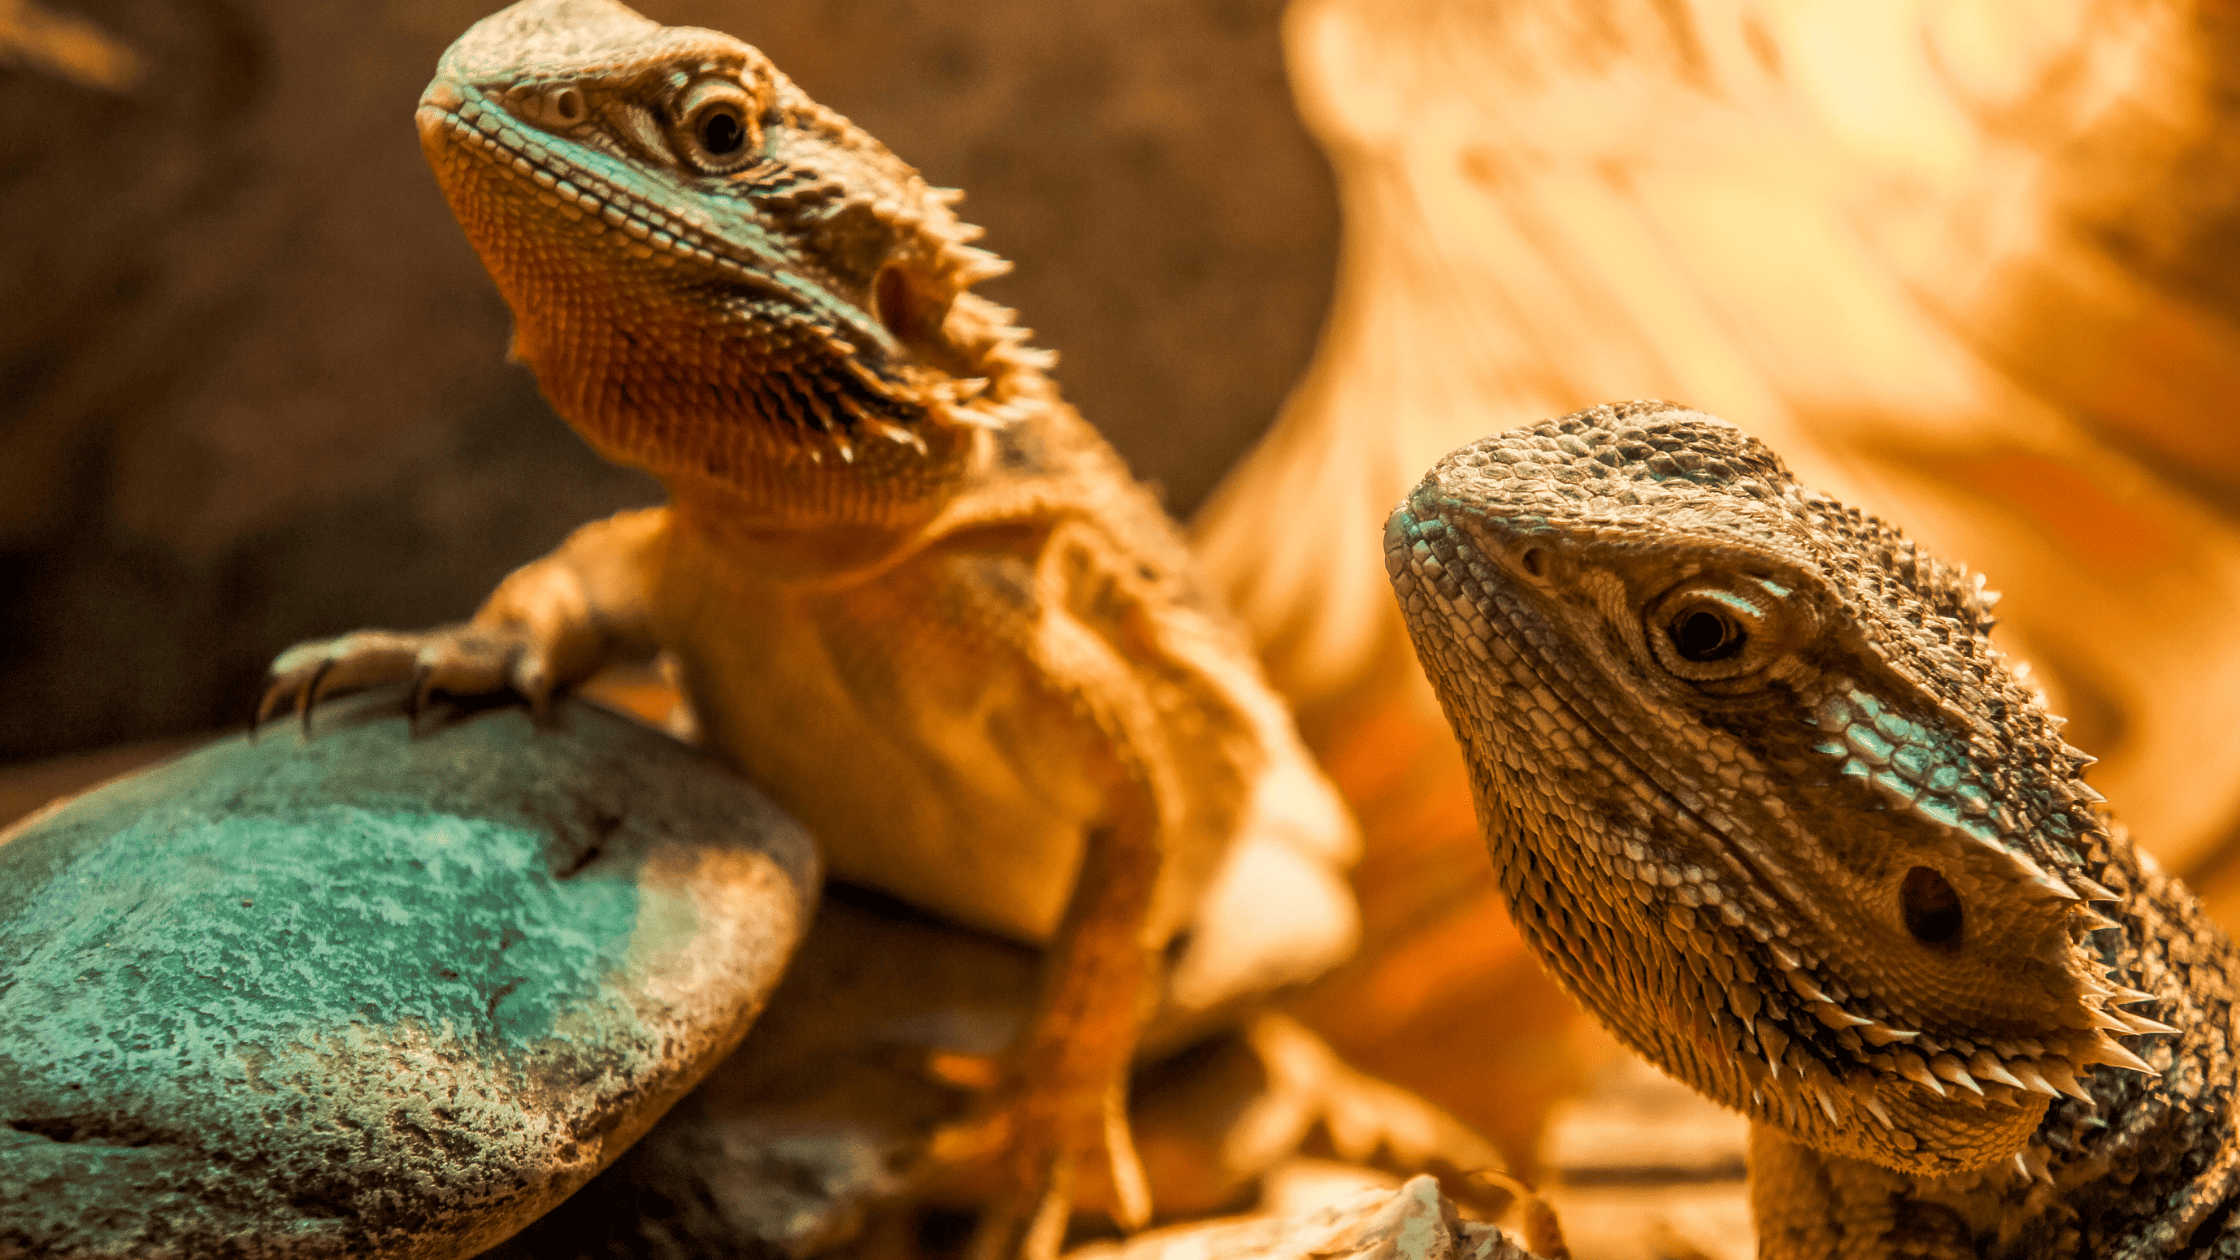 Do Bearded Dragons Need a Heat Lamp? If you're setting up a habitat for a bearded dragon, you may wonder if it needs a night time heat source or a heat lamp. Let's discuss all about it. Do Bearded Dragons Need a Heat Lamp? Yes, in order to keep a bearded dragon's habitat at an optimal temperature, it is typically necessary to provide a heat source, i.e., a heat lamp. When the temperature in the vivarium drops below 76 degrees Fahrenheit, this lamp must be turned on. In most cases, bearded dragons must be kept under a heat lamp for 12 to 18 hours daily. Beginners may find it hard to figure out how much light and heat a bearded dragon needs, which is understandable. Choosing the improper fixture might impair your bearded dragon's health. This article will tell you all you need to know about how much heat a bearded dragon needs. What are Heat Lamps? Heat lamps are light bulbs that give off both light and heat. They are available in various forms, which can be used for multiple purposes and wattages. You may get ceramic heat emitters, vapour bulbs, and heat lamps for your bearded dragon, supplying it with the necessary amount of heat to keep it healthy. The majority of the time, heat lamps are placed in the locations where beardies like to sunbathe. During the day, here is where they will rest and either perch or lay. They do this so they may also be exposed to UV radiation and heat. Since this is how bearded dragons act in the wild, it's only natural to let your pet bask in your home. The wattage of the light bulb that you will put in the heat lamp will be determined by the environment in which it will be kept. If you have a terrarium that is 50 gallons in size, you will need a bulb with a lower wattage than if you have a 100-gallon terrarium. To maintain the same temperature inside the terrarium, the heater's wattage will need to be increased. Do Bearded Dragons Need Heat Lamp To Sleep? Bearded Dragons need a heat lamp to keep them warm at night, but only when the temperature dips below 76 degrees Fahrenheit. During the day, it will be pretty warm, but at night, the temperature will drop to about 70-76°F. If the temperature in the room is already this high or close to it, then you do not need to purchase any more heaters to keep your beardie warm. On the other hand, if the temperature falls below the range of 70 to 76 degrees Fahrenheit, you might want to acquire a ceramic heat emitter. A ceramic heater will produce no light while still providing sufficient heat to maintain the tank's temperature at a constant level. How to Use a Heat Lamp at Night for a Bearded Dragon? At night, you might also require the use of a heat lamp. This is to ensure the temperature doesn't fall below 76 degrees Fahrenheit. The great news is that you can find nighttime heat bulbs in stores, and these bulbs produce a lesser degree of light. Because of this, your bearded dragon can maintain a comfortable temperature without being bothered by any light. Night-time heat bulbs are often sold in shades of red or dark blue and may be purchased at pet stores as well as online. These bulbs' wattage can range from 15 to 75, depending on the specific model. Because your bearded dragon cannot see the light emitted by these bulbs, you won't have to worry about the bearded dragon being scared by it. If you use a lamp that simulates daylight at night, please do not do so since it will prevent your dragon from having a restful sleep. What Happens If a Beardies Gets Cold? Many bad things can happen if you don't keep your beardie warm. The first sign is that your pet will become tired and have a diminished appetite or none. This is because inadequate illumination for bearded dragons causes a slowdown in the bearded dragon's metabolism. Exposure to cold for an extended period can effectively constitute a dead environment for a bearded dragon. Because of this, the temperature is an extremely important factor. What About Under Tank Heat Pads? Bearded dragons require a steady supply of moderate heat, which may be provided with under-tank heating pads. In addition to the heat lamps, these cushions may be placed below the terrarium to provide additional warmth. Heat pads are perfect for warming the layer underneath and giving your bearded dragon a little more warmth. Heat pads are beneficial, not just in the winter but also in other cold seasons. If you need a heating pad under the tank, you'll have to ensure it fits the terrarium. This is because heat pads of an insufficient size will not provide sufficient heat. You may want more than one heat pad if you have a huge terrarium. In addition, you will want an adequate number of power outlets into which the heating pads may be plugged. Heat Tape Heat tapes, also referred to as "heat cables," can heat particular habitat regions. Wrapping tape over the terrarium's larger rocks is one option. Tape is another option that might be used to cover the perch. When it is sunbathing, this will offer additional heat for your bearded dragon. Heat tapes should only be used when needed. If you use an excessive amount of heat tape, you run the risk of the terrarium becoming overheated. This might cause burns. Ceramic Lamp A ceramic lamp is excellent for heating at night because it doesn't give off light and won't mess up your bearded dragon's natural sleeping schedule. You can get a lot of great ceramic lamps at great prices. Make sure it is connected to a thermostat so it will only turn on when the temperature falls below 18 degrees Celsius. Infrared Nighttime Bulb A bulb that emits infrared light is yet another suitable option. The illumination from this bulb won't disturb your bearded dragon's sleep. Just remember that a ceramic lamp will last longer than an infrared bulb. Using Thermometers You should use a thermometer in the warmer parts of the terrarium, such as the basking area. This will let you always keep an eye on the temperatures. You can get good results with digital thermometers, but if you like, you may also use an analogue thermometer. Whatever type you pick, make it function properly, and check the heat frequently. Putting thermometers in different places in the terrarium lets you control the heat. Your bearded dragon will be pleased and in good health, if the temperature in its terrarium is maintained within the appropriate range. Do Bearded Dragons Always Require Heat? Your bearded dragon's vivarium should have the same heat and light cycle as the wilds, where the temperature drops at night. Because of this, your bearded dragon requires a soothing effect at night. This allows you to switch off your heat light when you get ready for bed. What Temperatures Are Unacceptable for a Bearded Dragon? In order for a bearded dragon to effectively digest the food it eats, the temperature of its habitat should be maintained at a level between 100 and 110 degrees Fahrenheit. If the environment's temperature is too high, the beardie will not be able to digest its food properly and will have other adverse effects on its health.